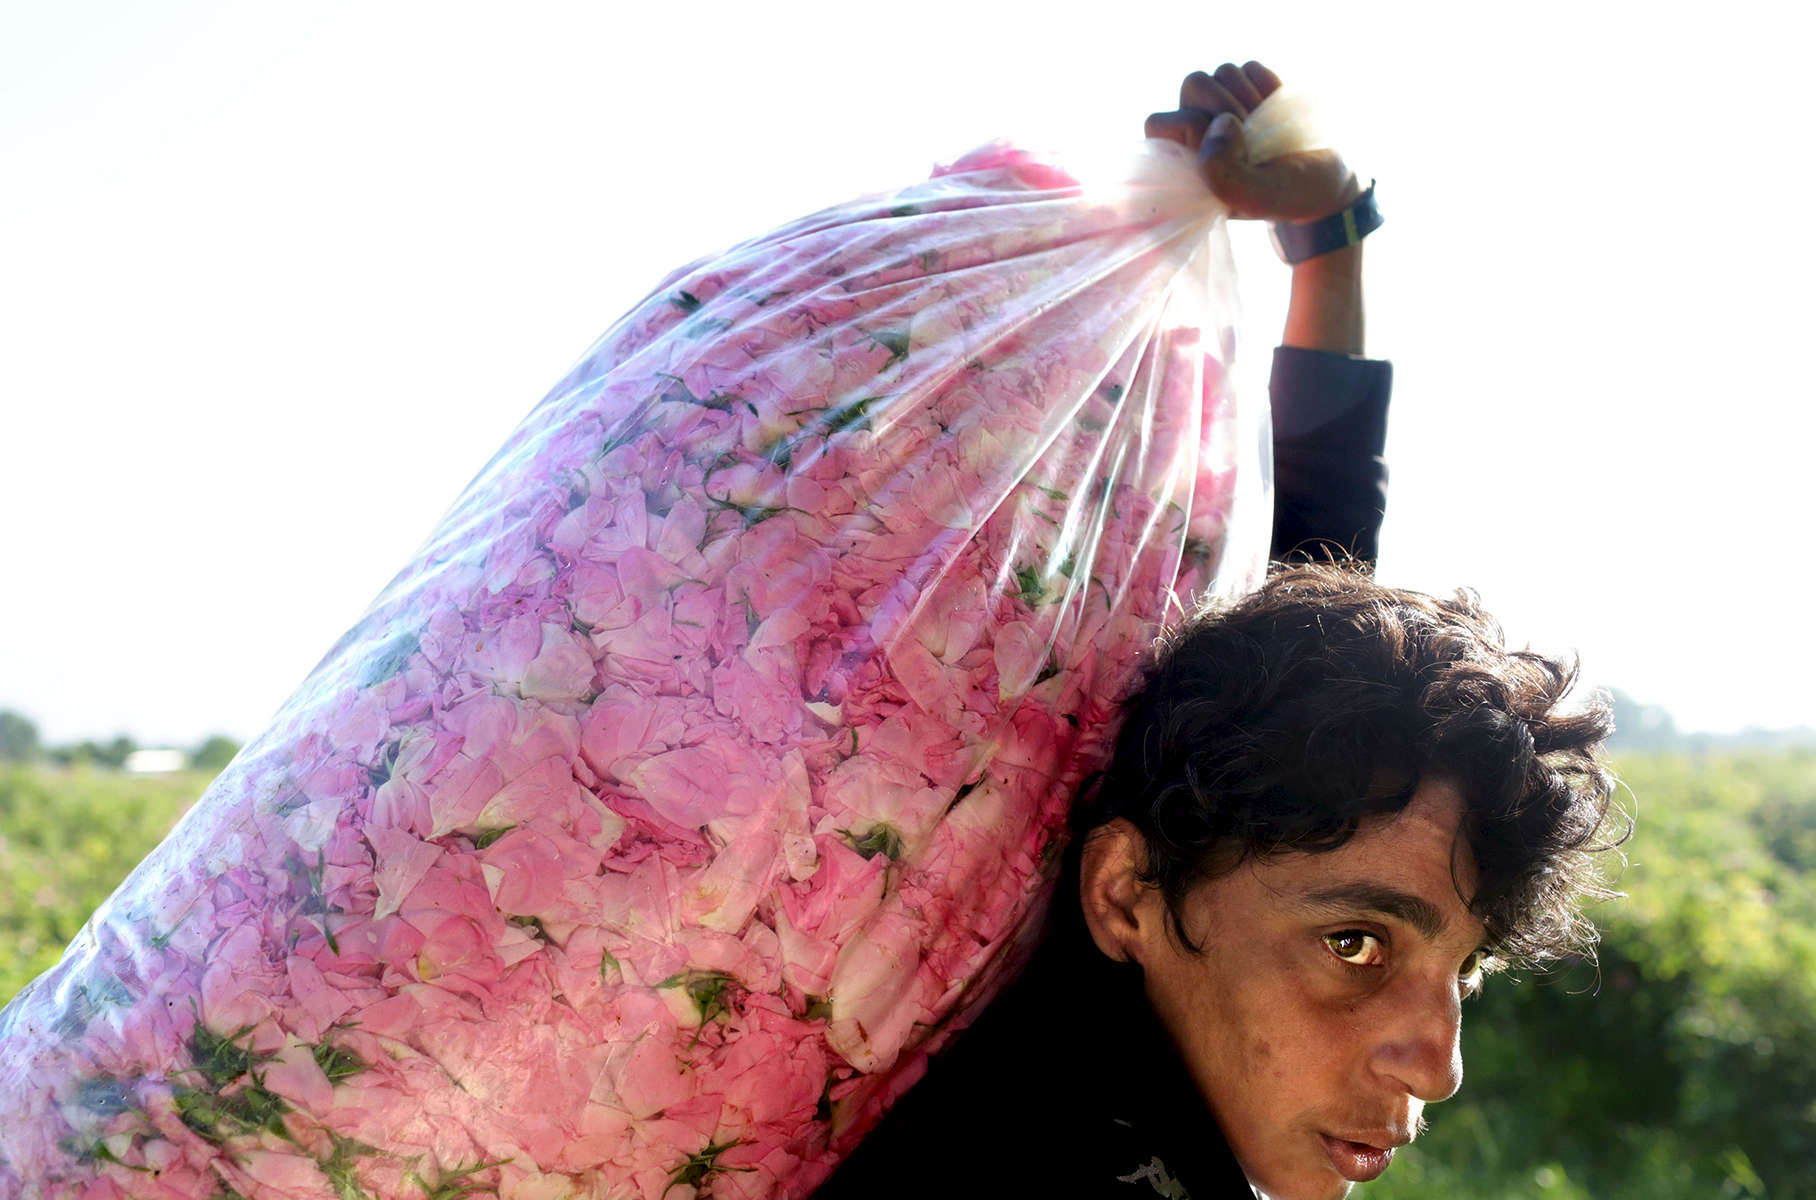 Stefka Todorova, 35, carries roses to be weighed in the rose garden of married couple Tihomir Tachev, 38, and Aleksandrina Aleksandrova, 38, in Buzovgrad, Bulgaria on May 23, 2018. This year, the two joined rose producers across Bulgaria's Rose Valley, dumping out entire bags of flowers on Bulgaria’s highways in protest against the low purchase prices by distilleries that process them into rose oil, the price of which has stayed relatively high. Rose flower prices, however, have fallen from 3 to 5 BGN leva (about $1.80 to $3 USD) per kilogram in previous seasons, to about 2-2.5 leva BGN (about $1.20-$1.50 USD) per kilogram this year - half of which rose producers say they use to pay their rose-pickers, and much of the rest for costs related to cultivating roses. Distilleries describe an over-saturated market, with more rose gardens popping up each year, which means some distilleries reject what surpasses their capacity. Through the farmers’ whisper networks runs a suspicion that distilleries have instead colluded to lower the purchase price of roses. Many say they'd like the government to regulate the entire chain between producers and processors - and even, set a contractual minimum purchase price. There is indeed a special rose subsidy in the works that the Minister of Agriculture, Rumen Porozhanov, plans to propose to the European Commission as early as next year. But a market economy, which is what Bulgaria’s has been for nearly 30 years since the fall of Communism in 1989, is ruled not by the government but instead by supply and demand. Tihomir Tonchev, from the communications department of The Ministry of Agriculture, Food and Forestry, says it’s simple math: the yield from rose gardens increased because the number of harvested gardens did as well, drastically dropping their product’s purchase value. Tachev says, {quote}There's beauty in Bulgaria, there's nature, but there is no country to back you up. It's only during elections that politicians care